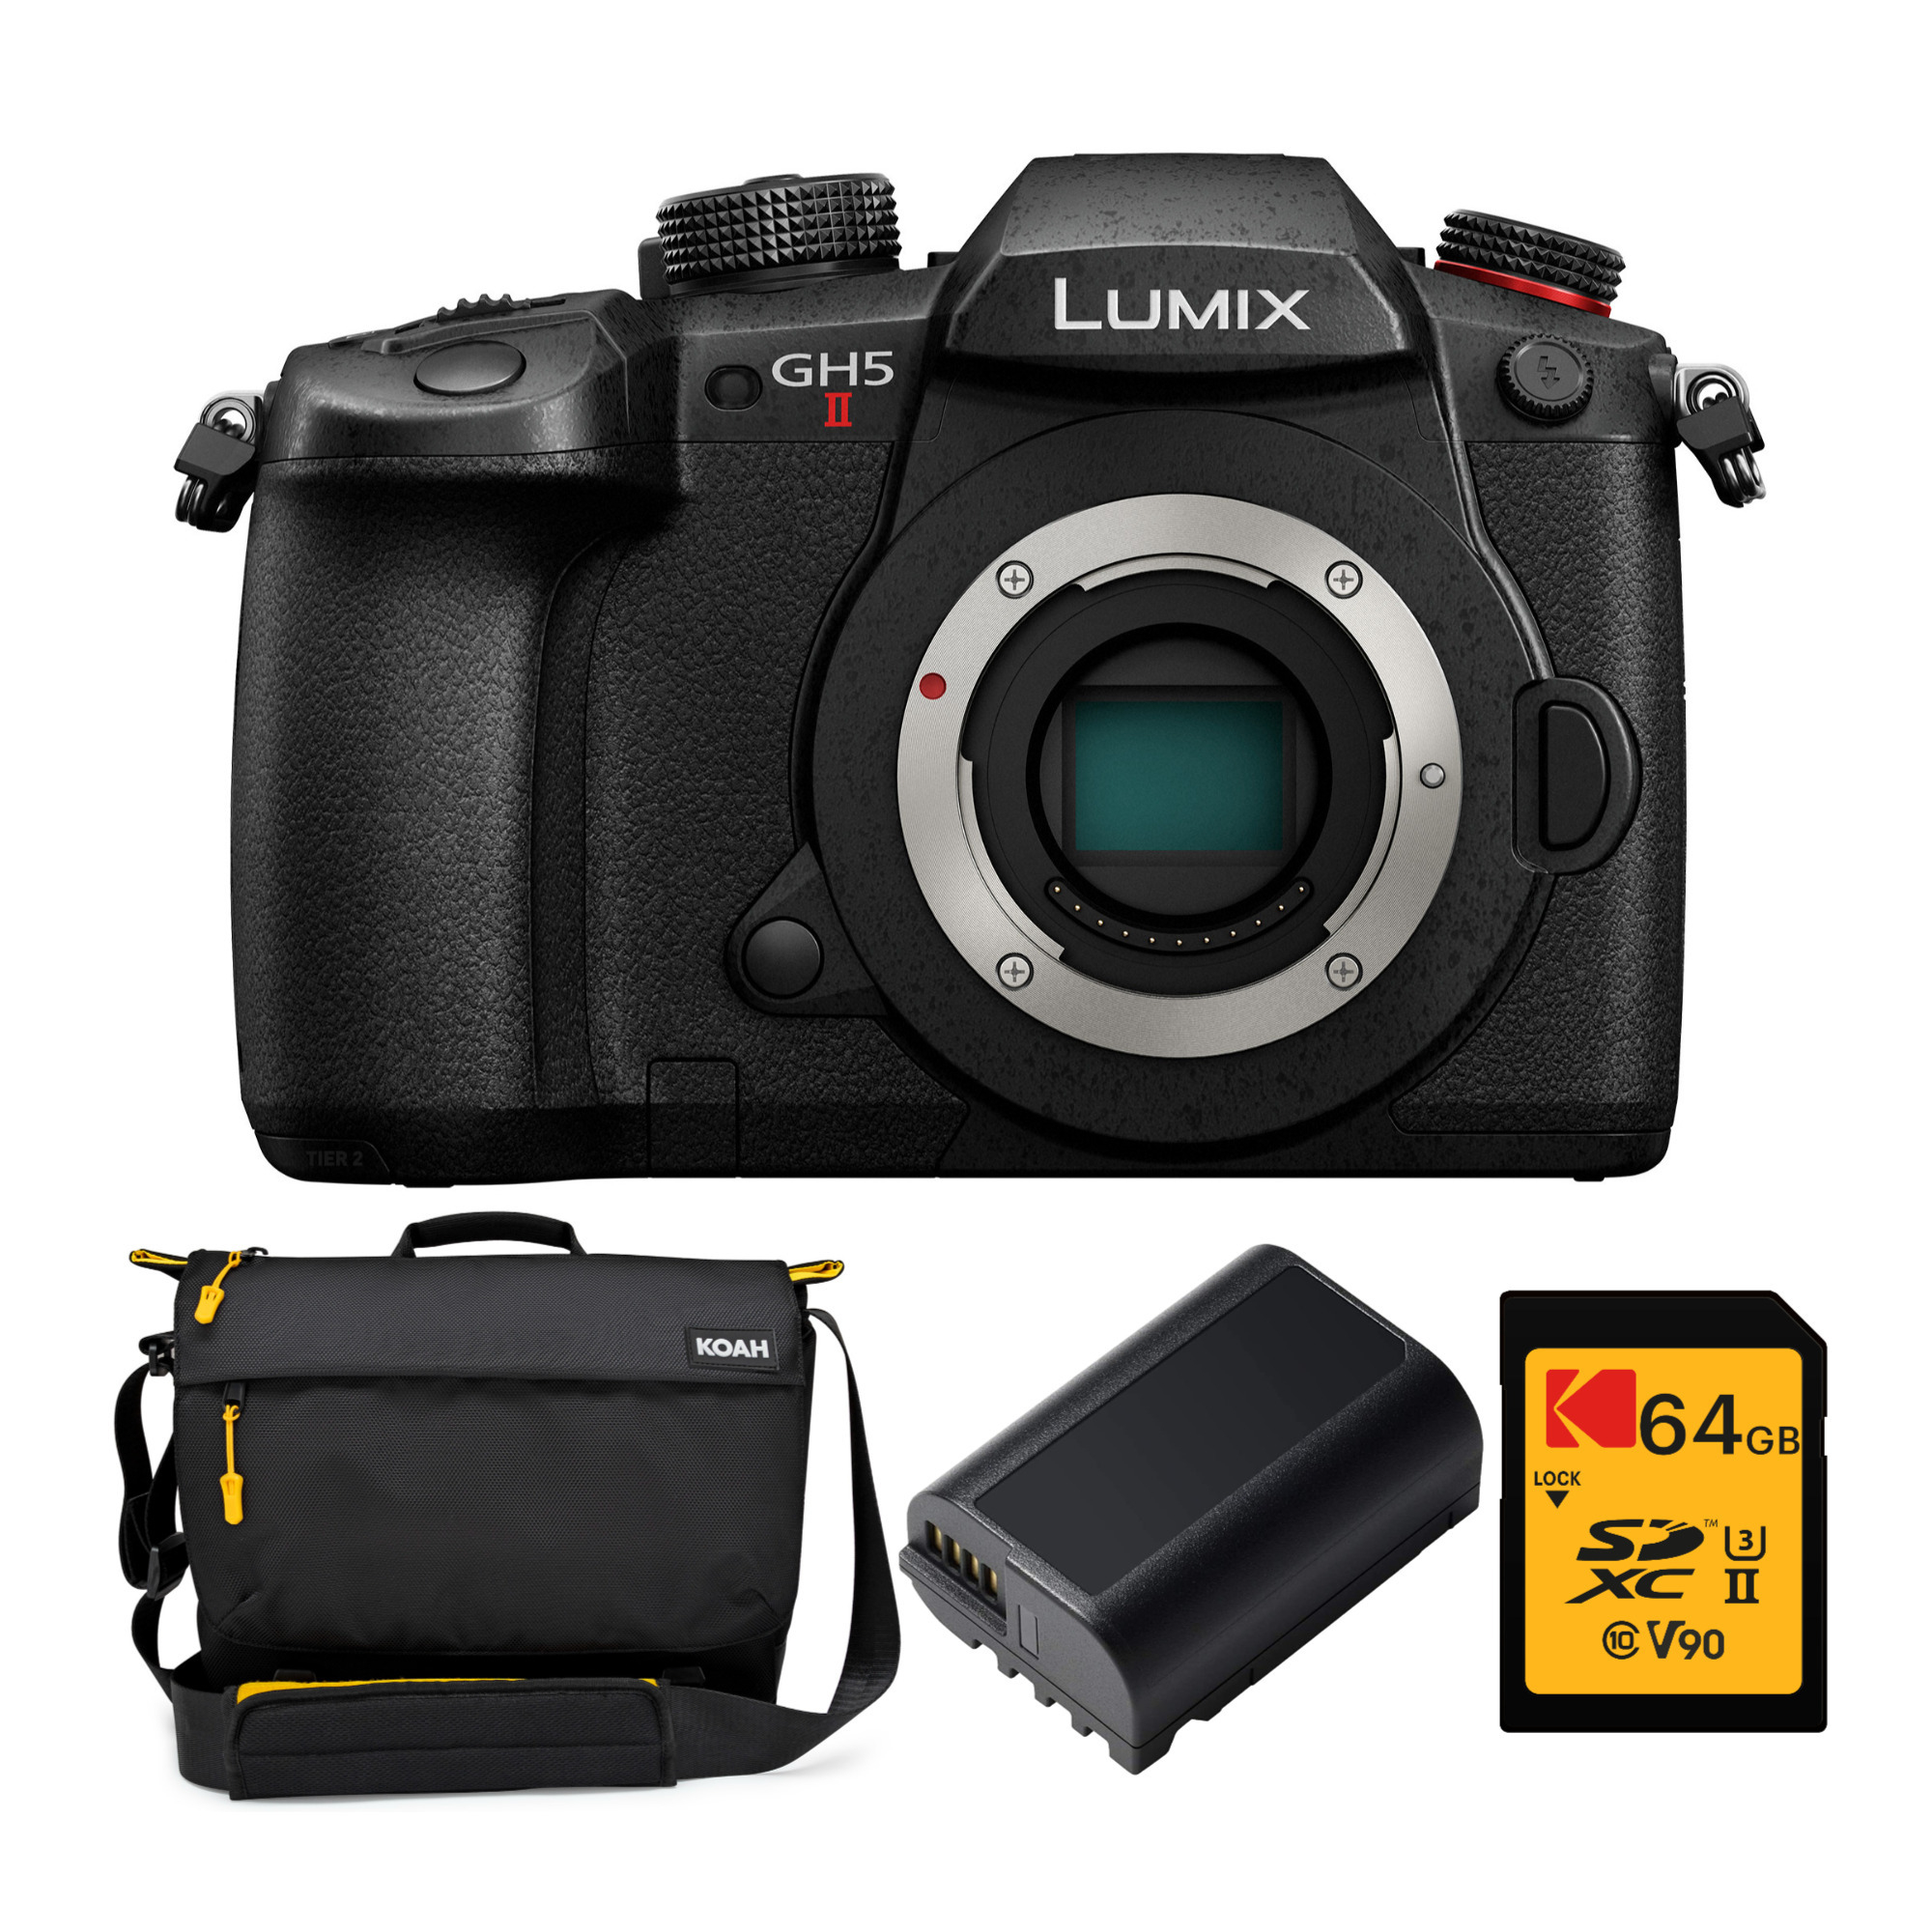 Panasonic LUMIX GH5 II Mirrorless Camera Body with Live Streaming with Extra BLK22 Battery Bundle